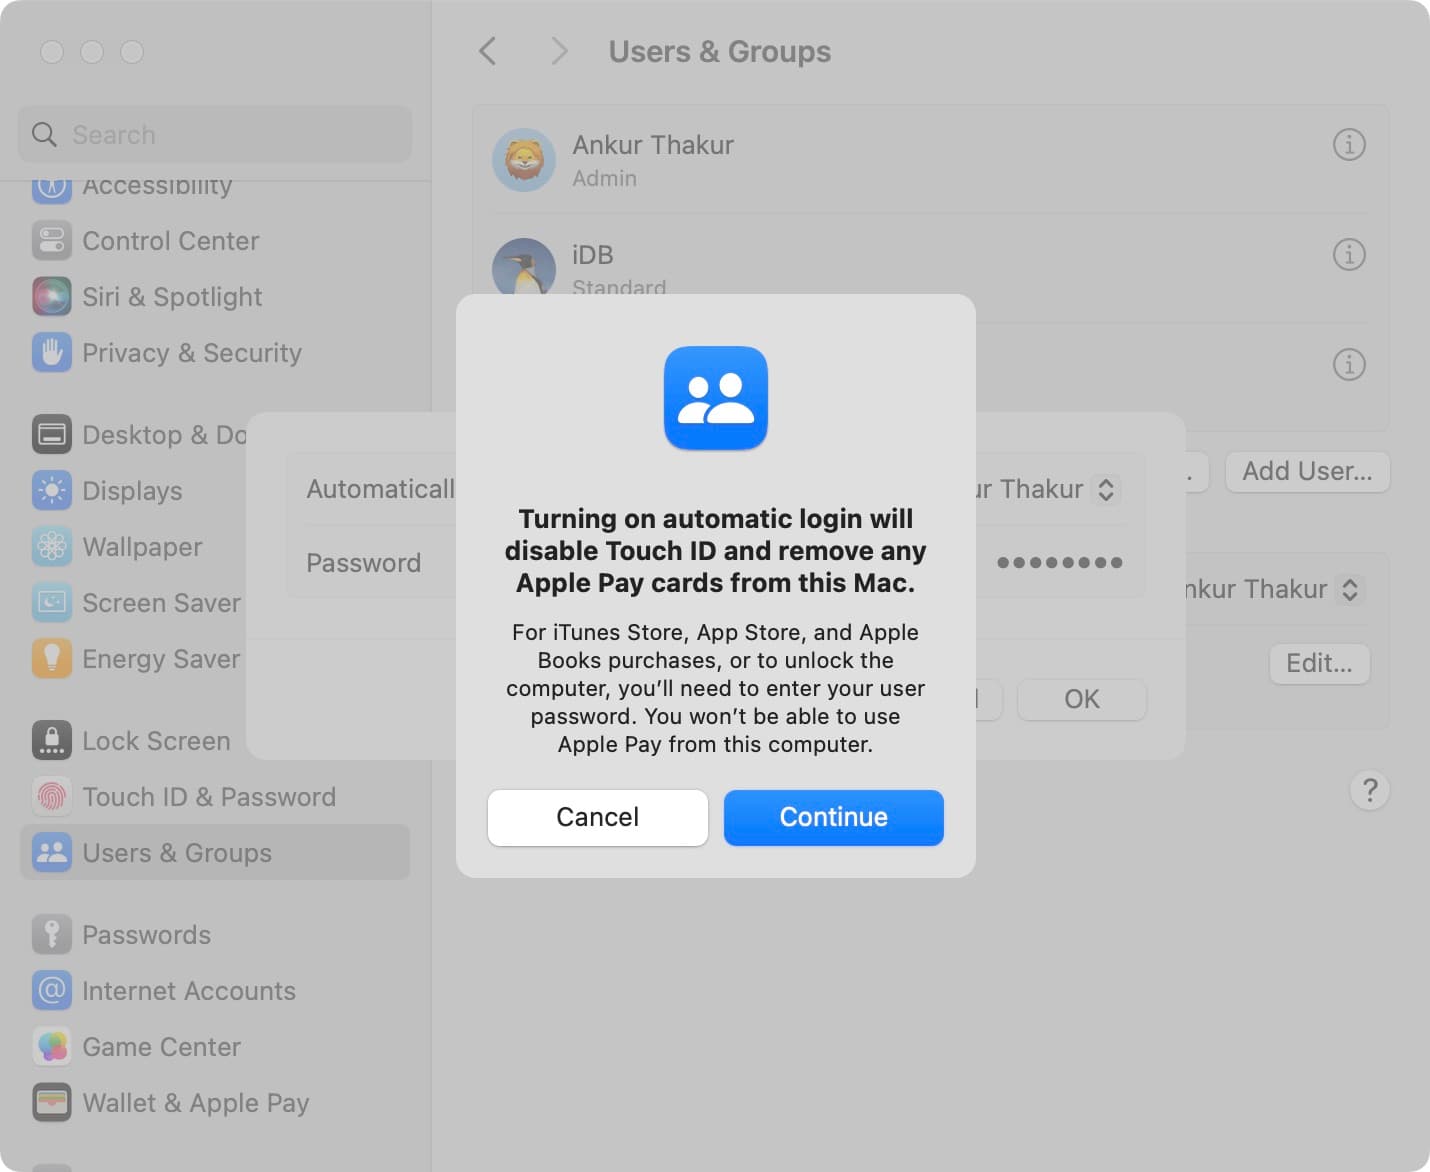 Click Continue to set up auto login on Mac